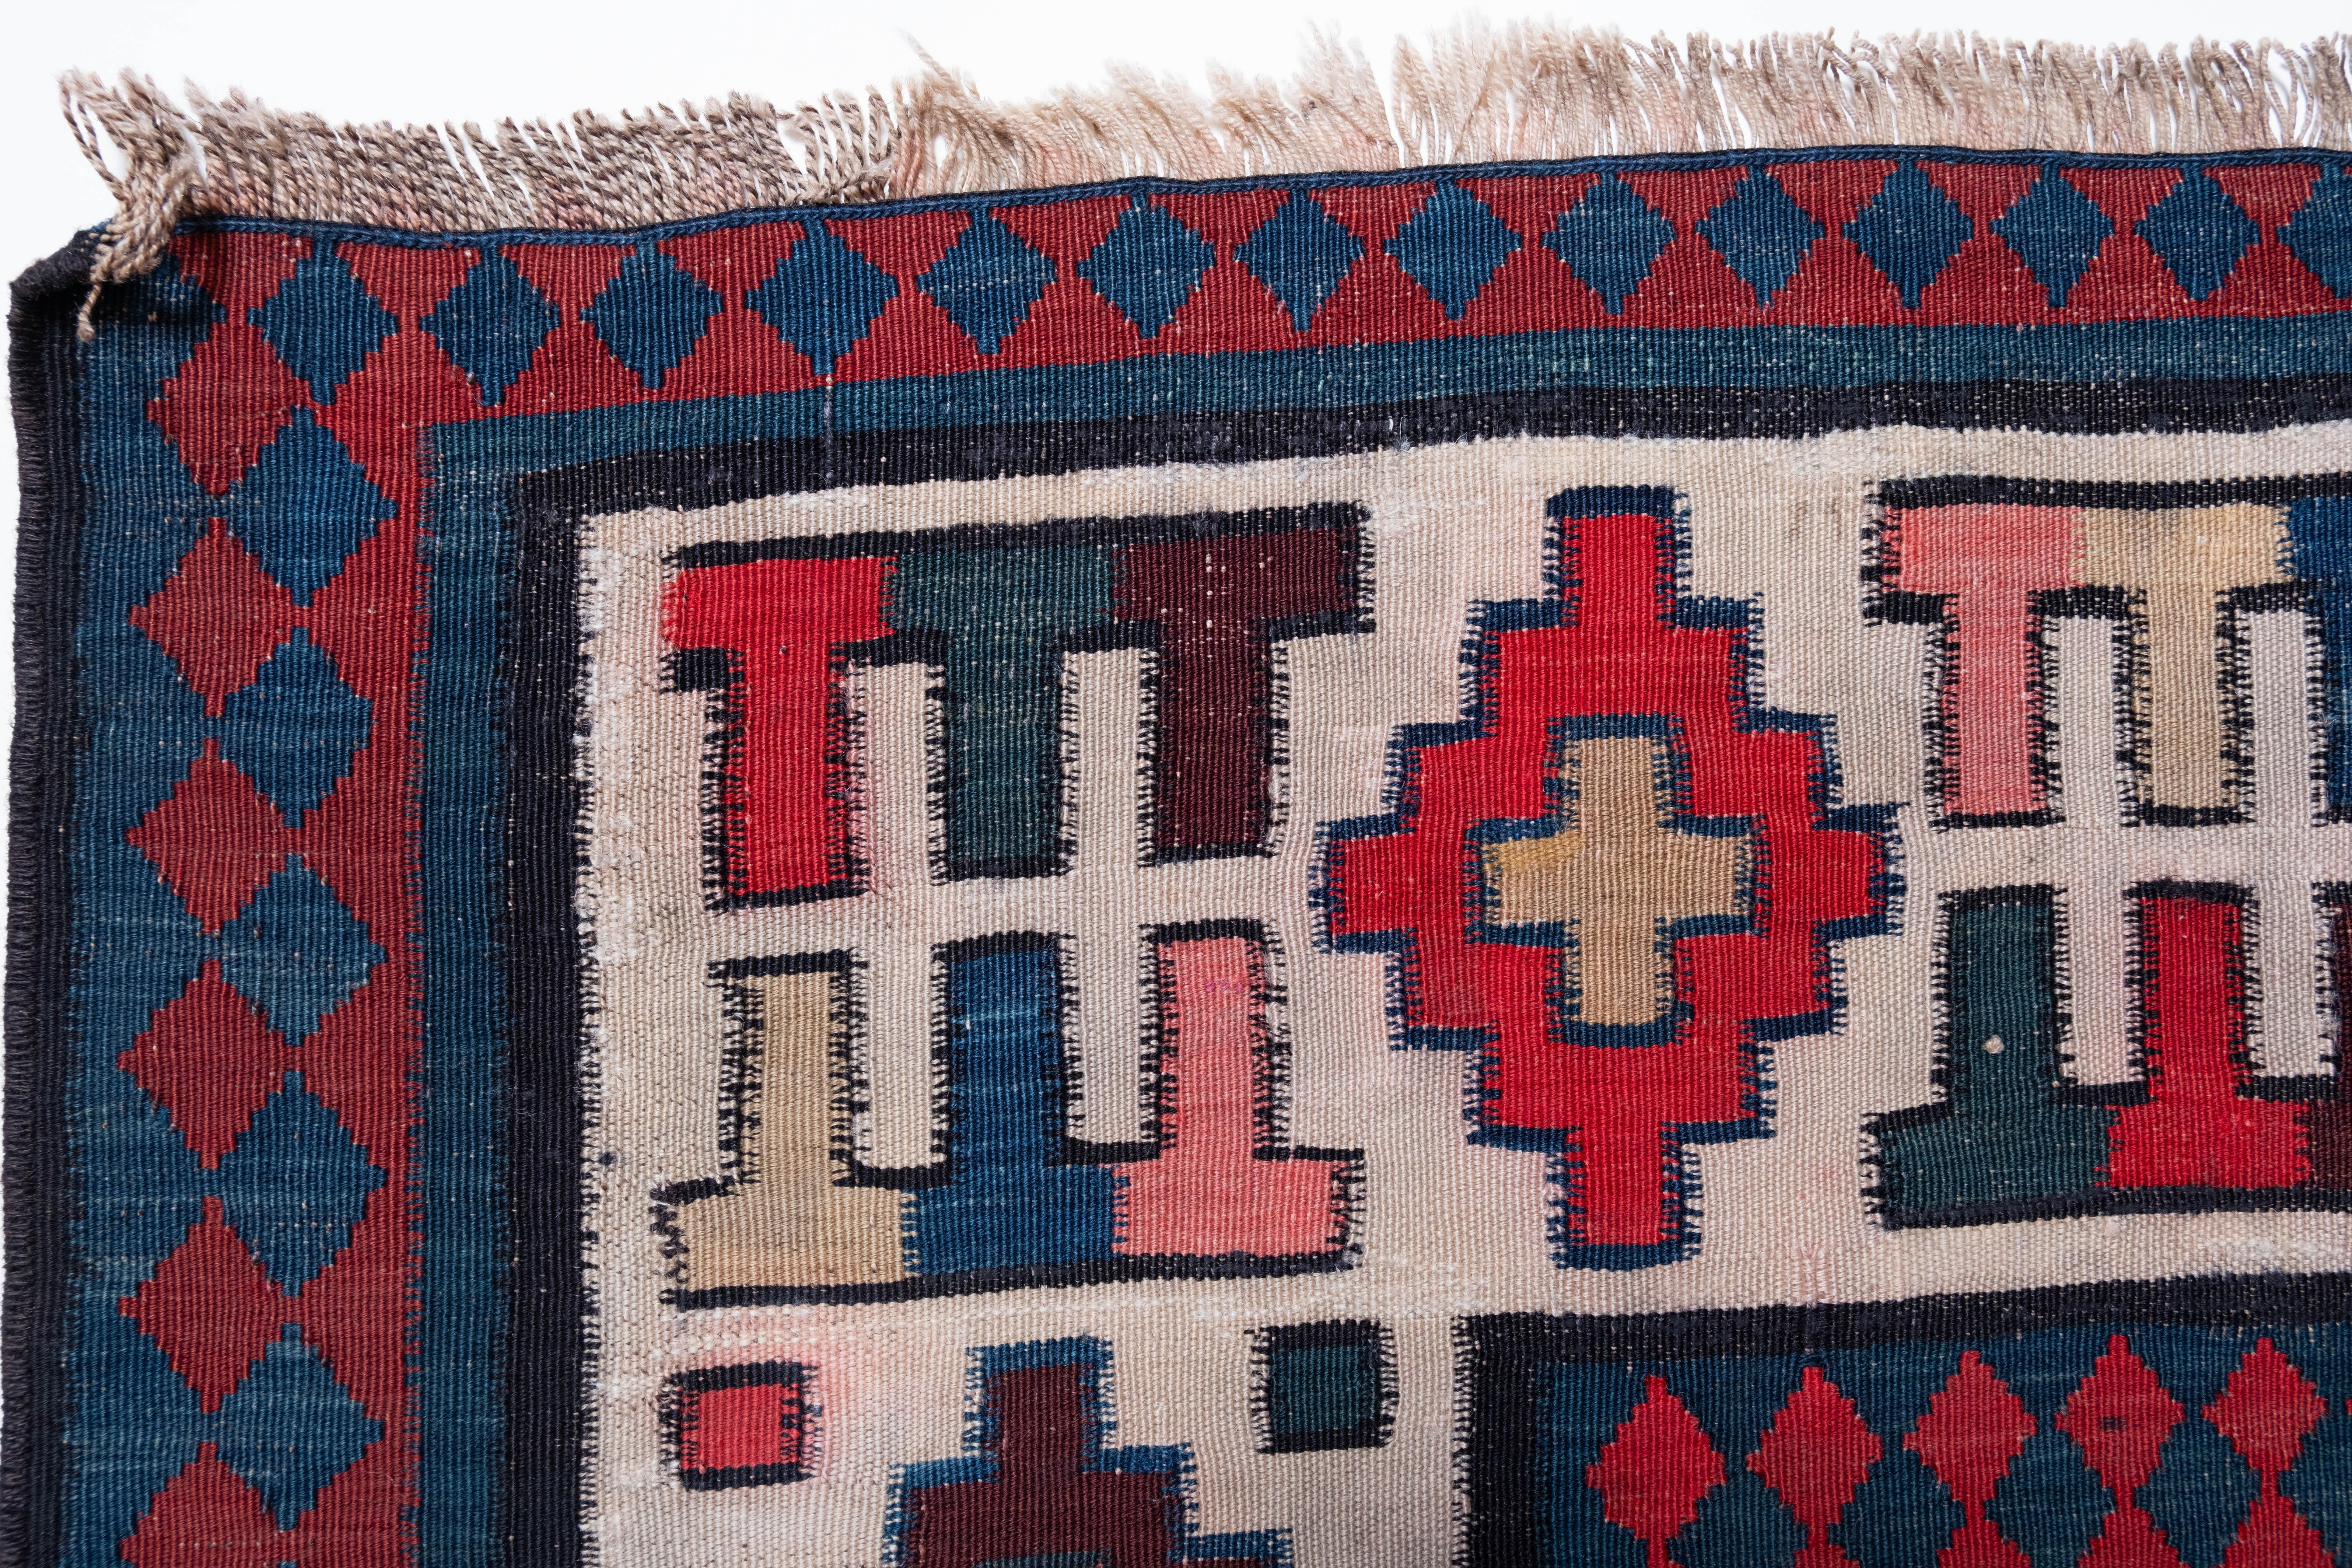 This is a large Antique Talish Kilim from the Caucasus region with a rare and beautiful color composition.

Of the four countries that make up the Caucasus, Azerbaijan produces the most kilims, and the land has a long history of weaving. The nomadic